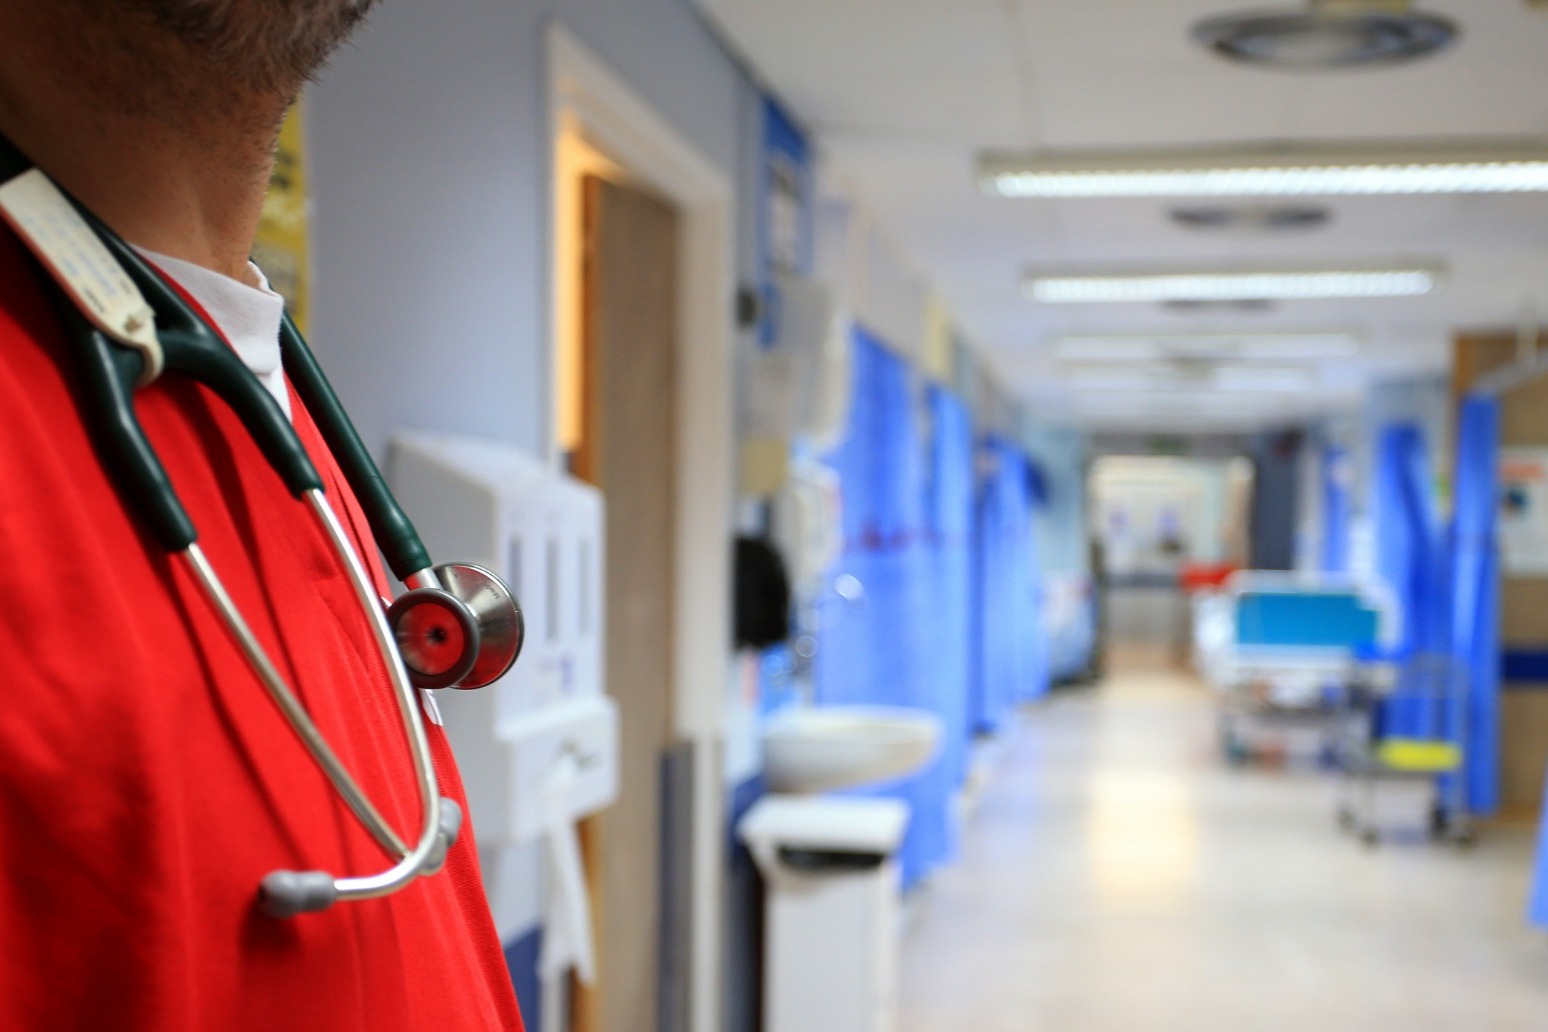 NHS backlog of two-year waits shrinks from 22,500 to below 200 